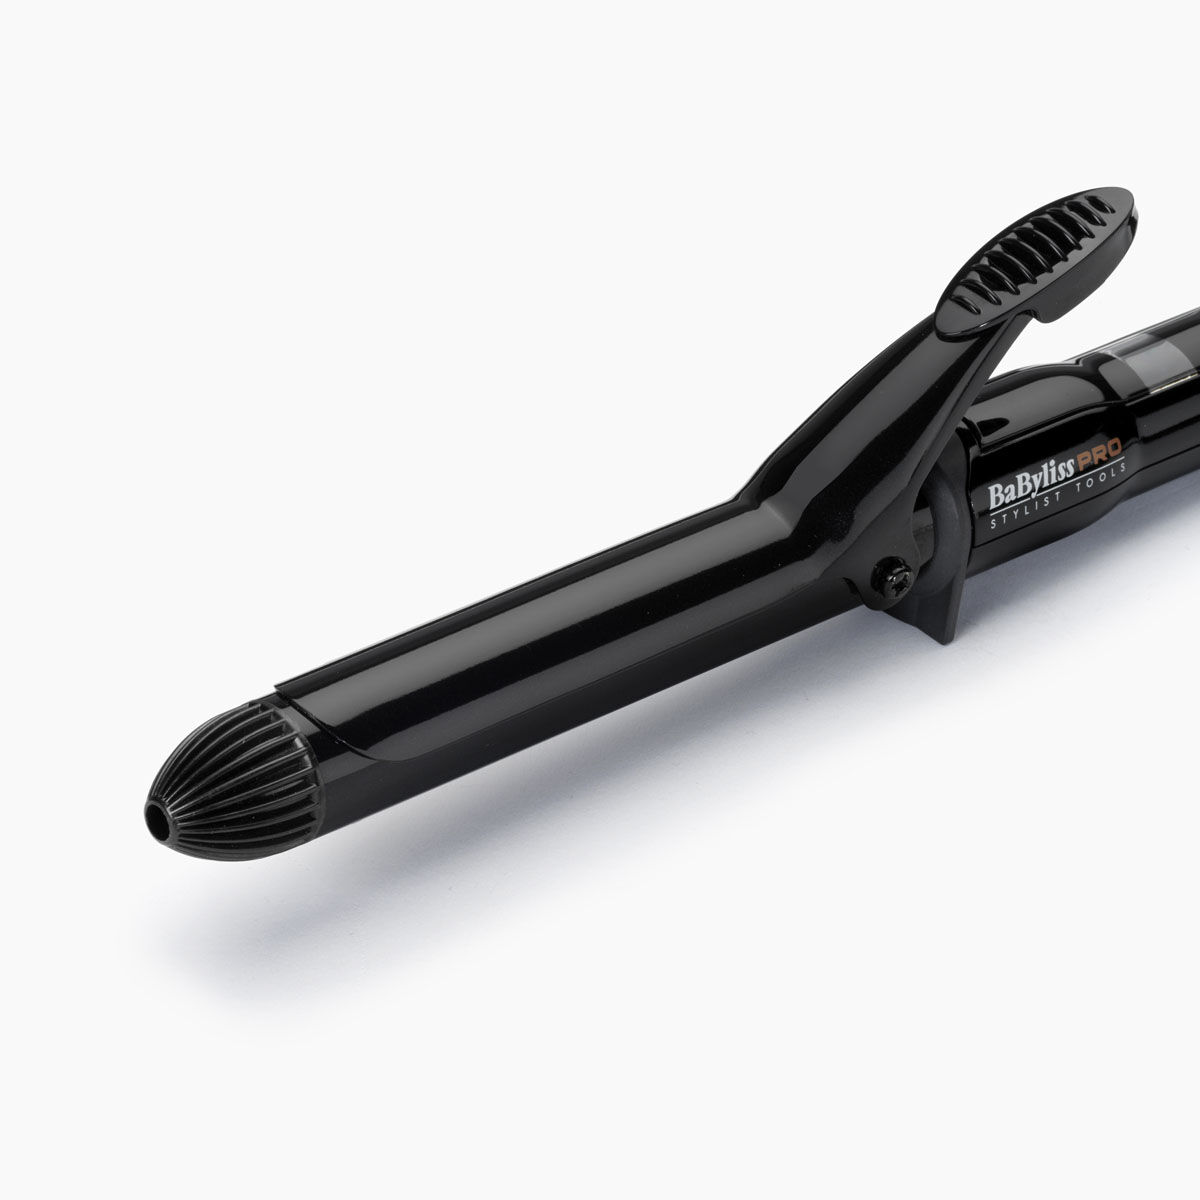 This topscoring Babyliss curling wand is now only 20 for Amazon Prime Day